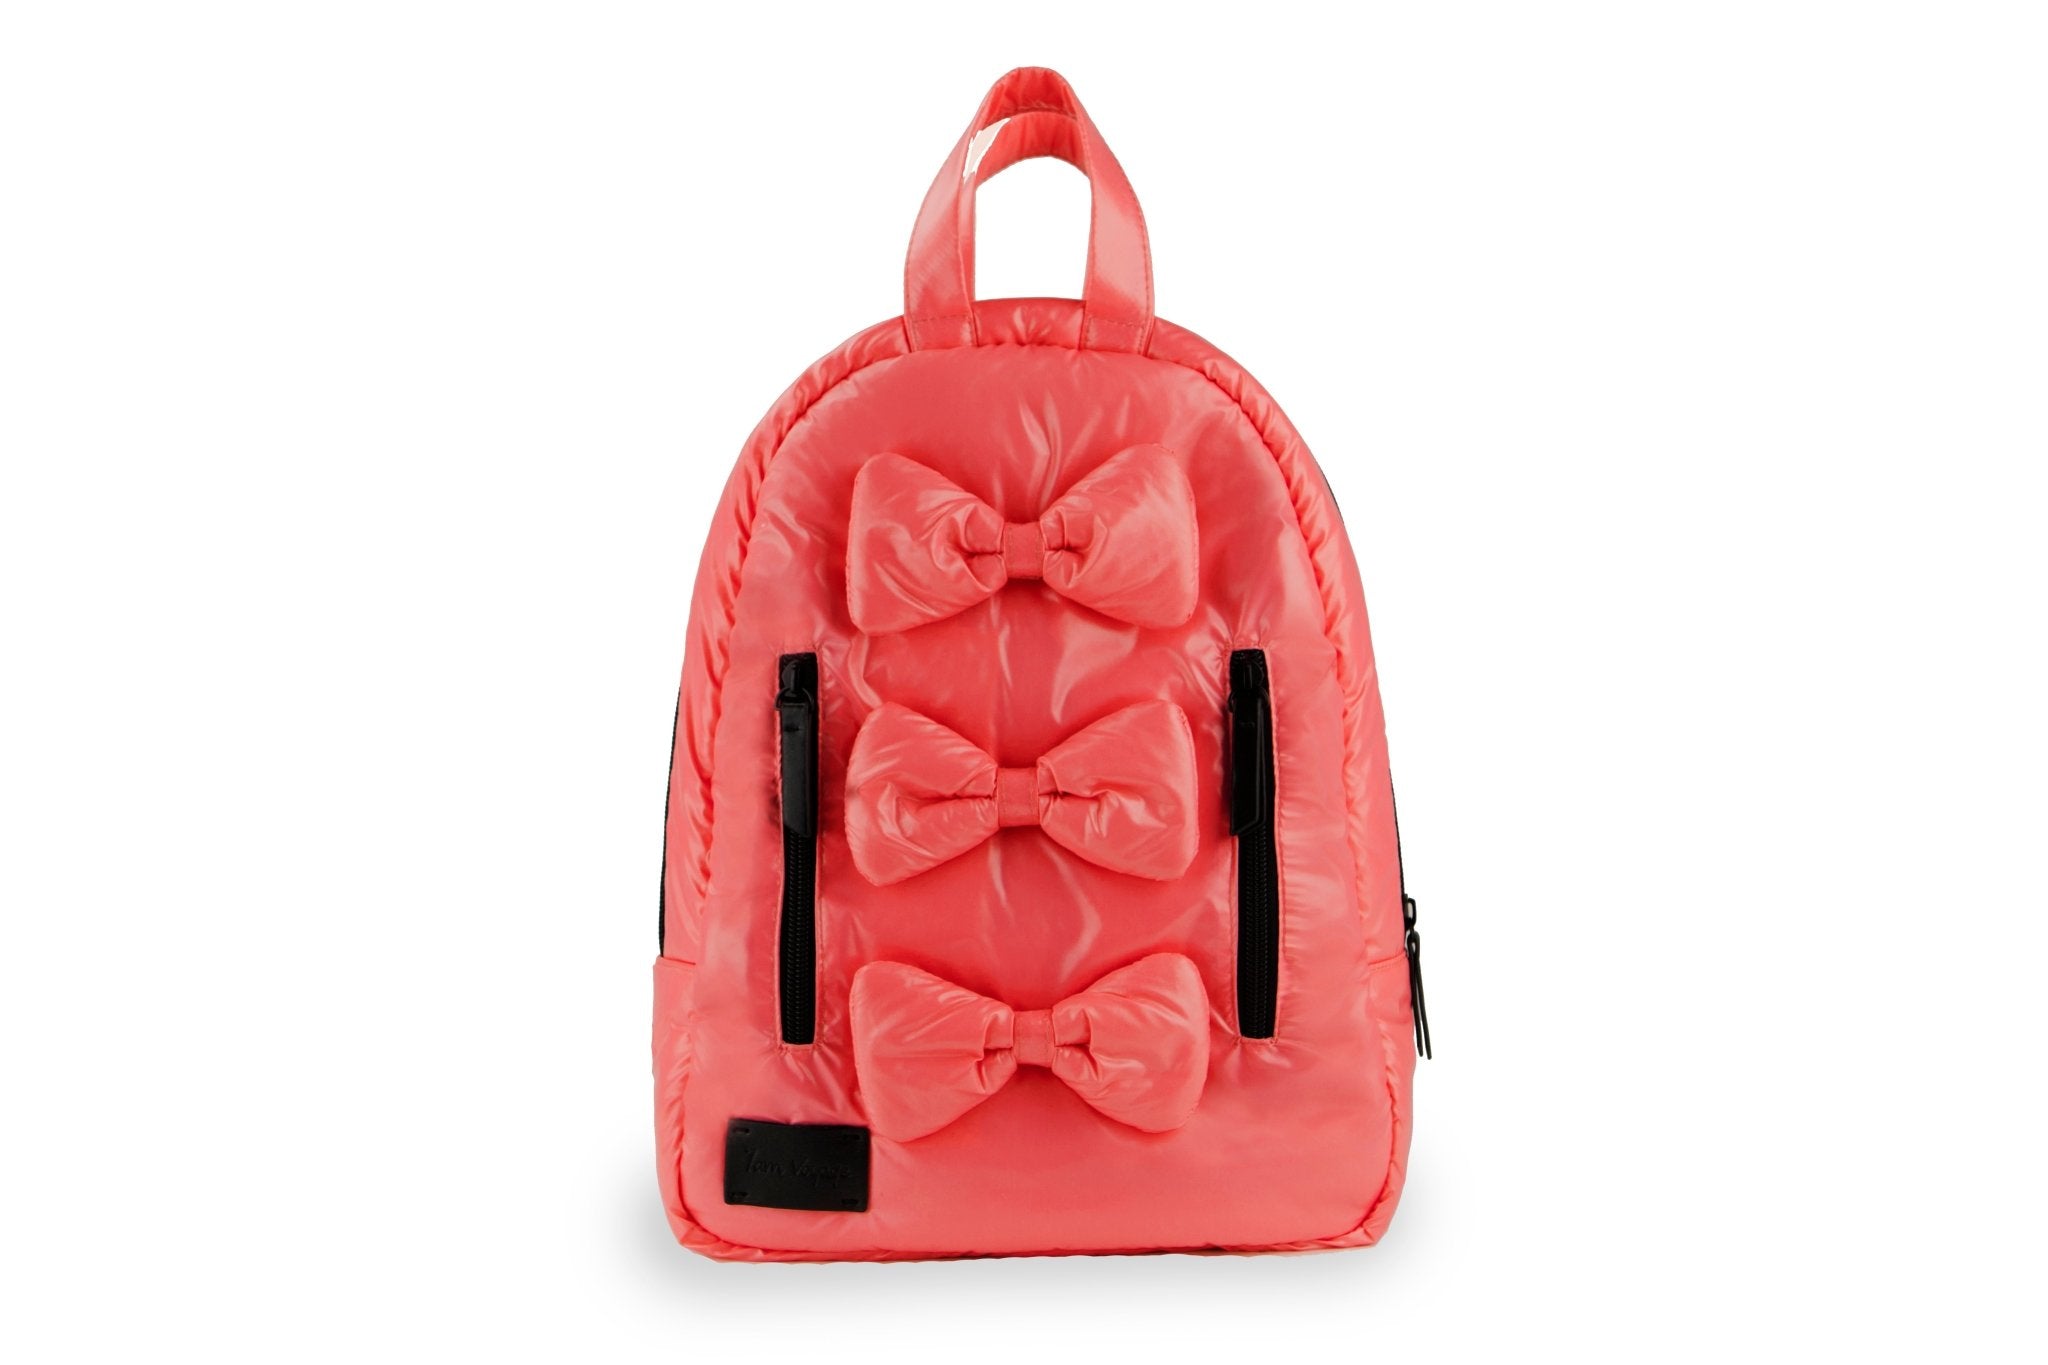 7 AM Voyage Mini Bows Backpack, -- ANB Baby